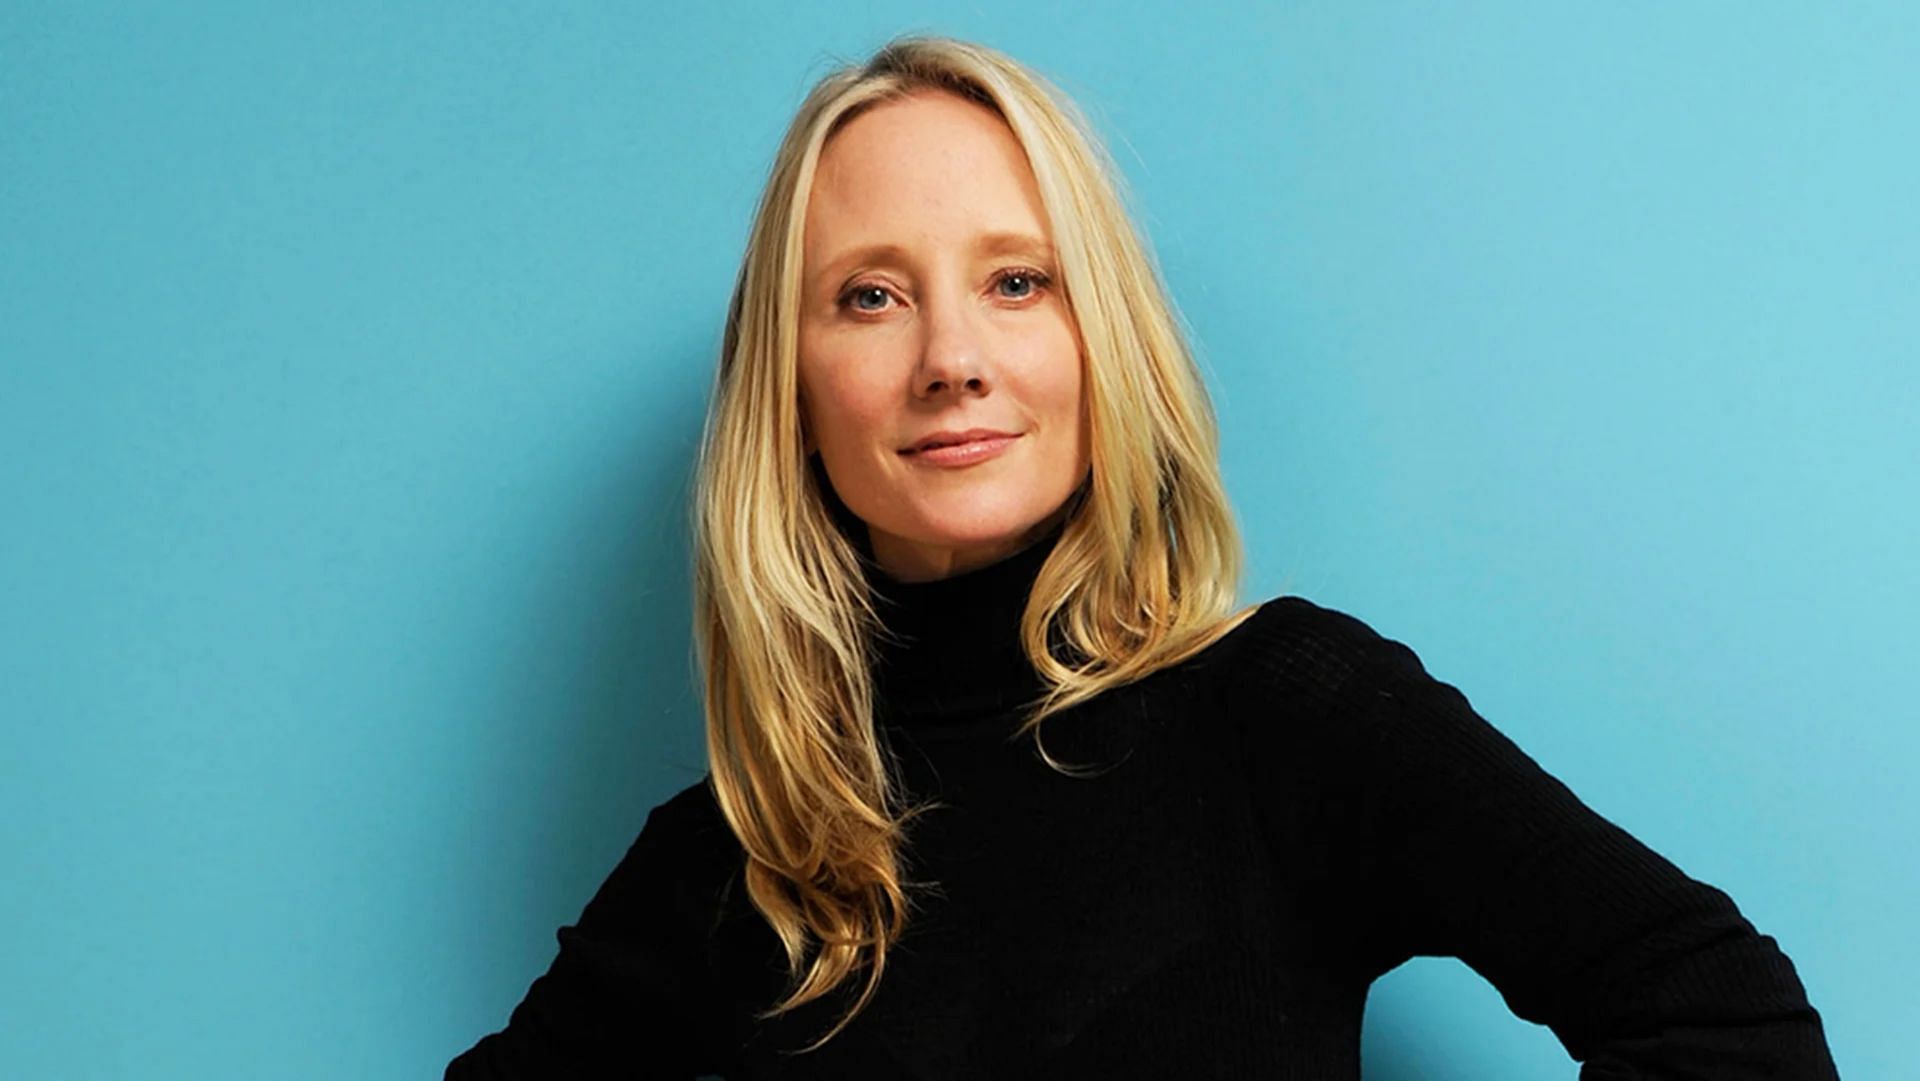 Anne Heche was involved in a deadly accident on August 5 (Image via Larry Busacca/Getty)